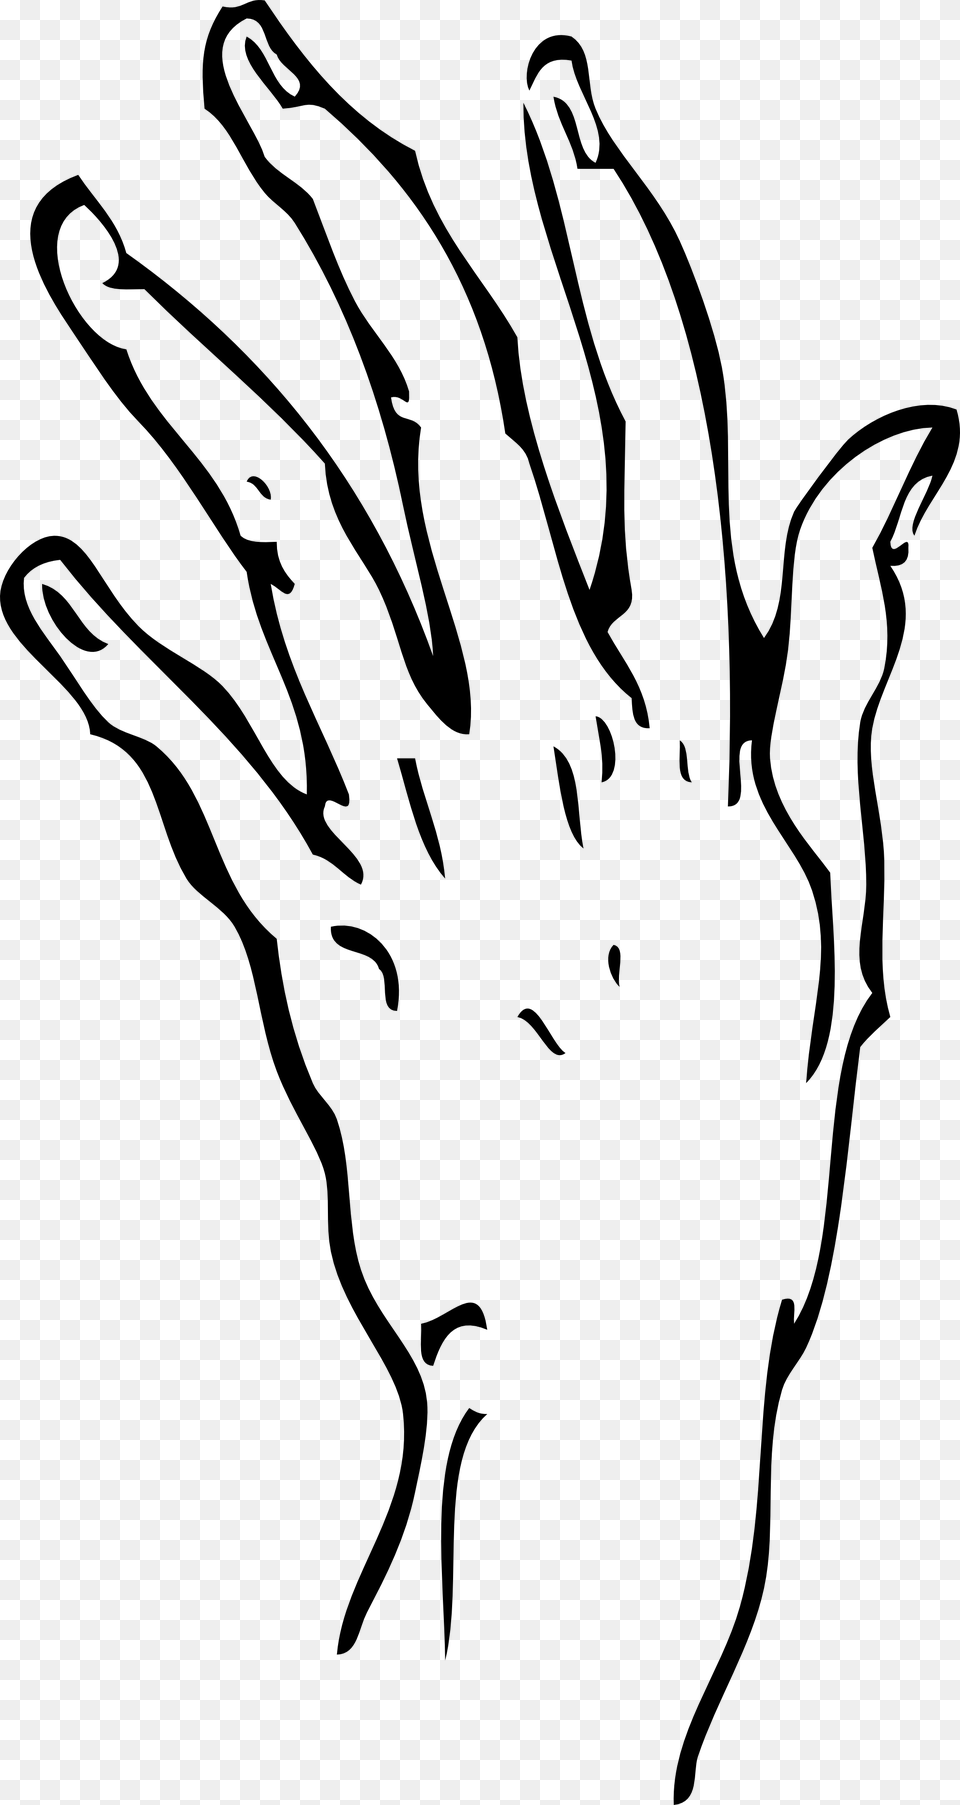 Hand Line Art, Stencil, Clothing, Glove, Weapon Png